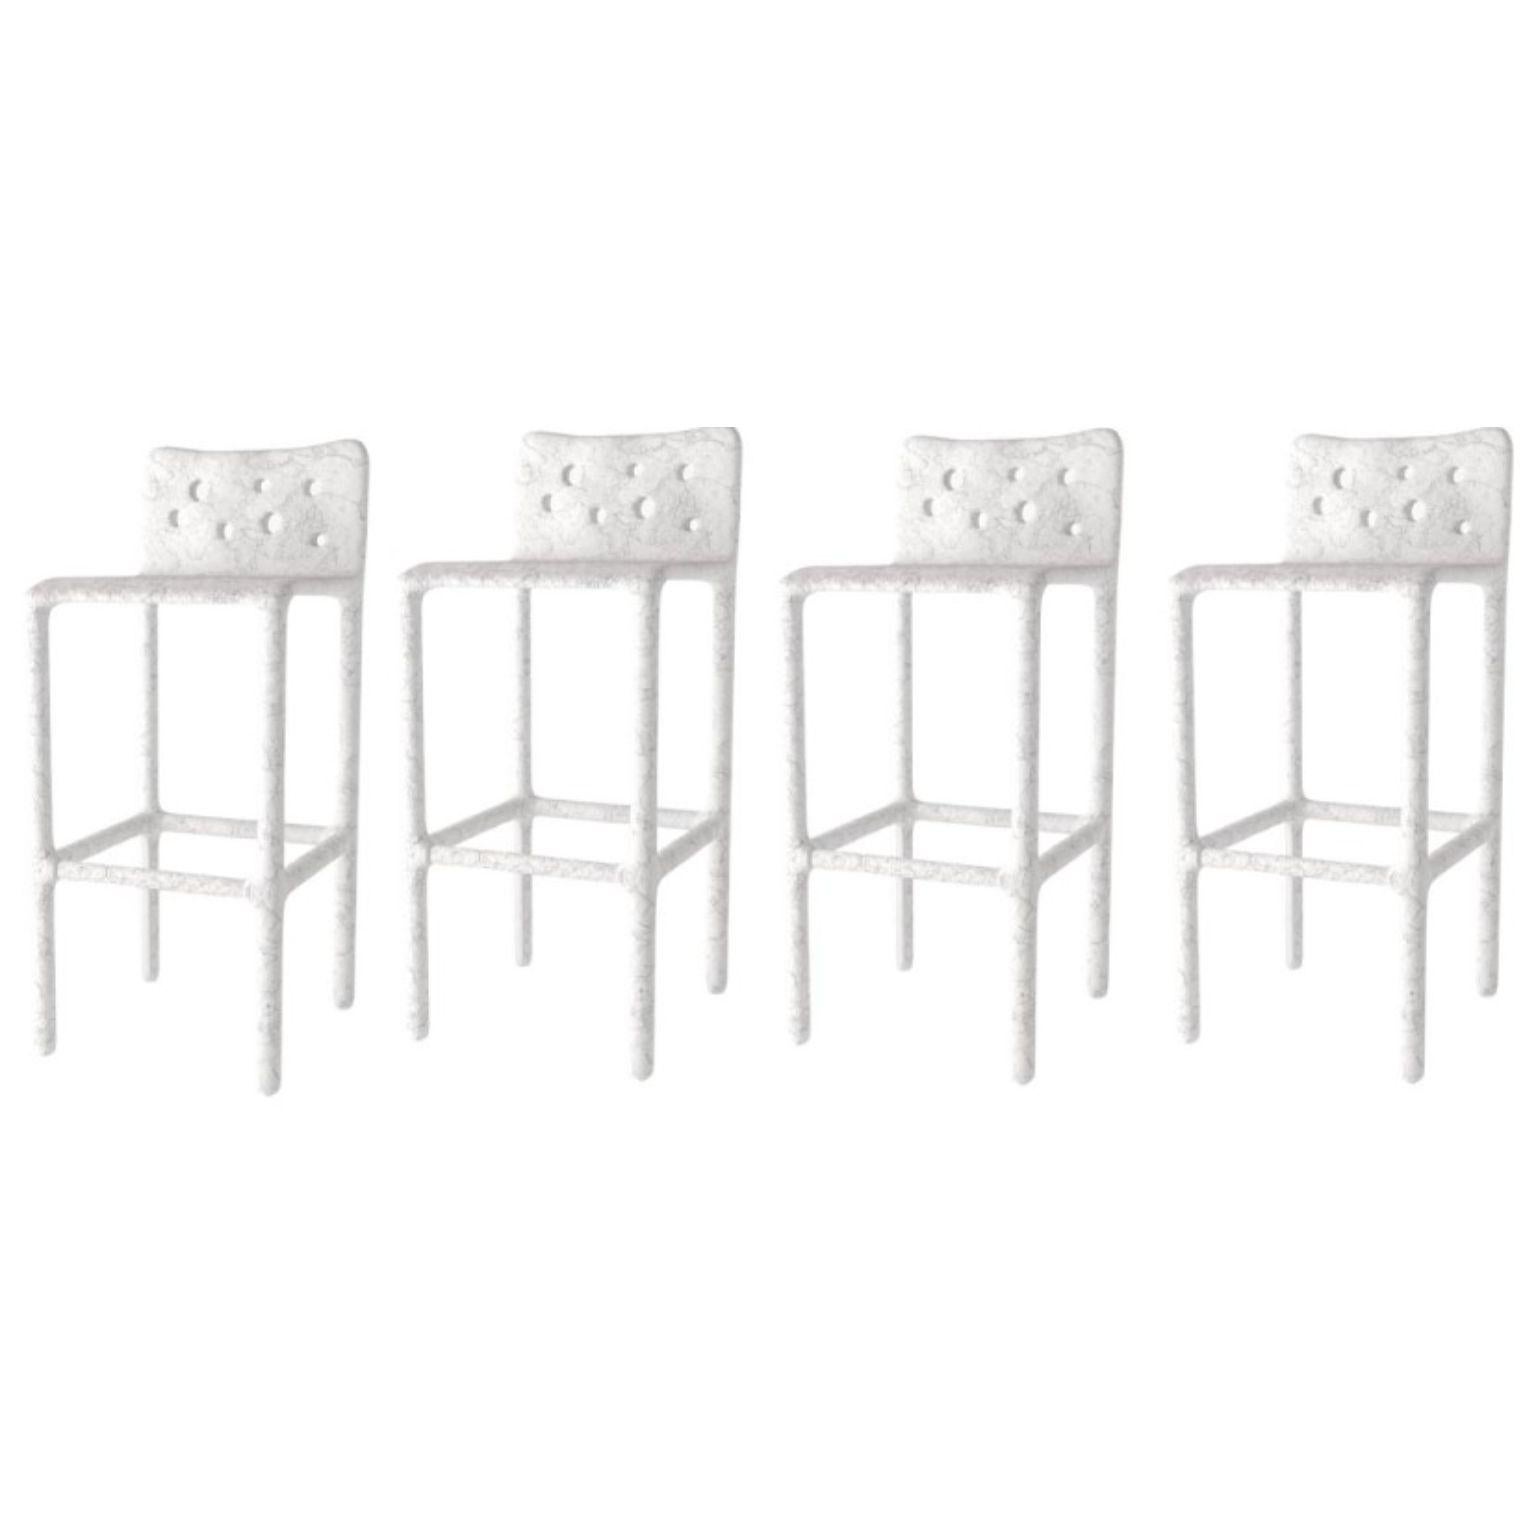 Set of 4 Outdoor white sculpted contemporary chairs by Faina
Design: Victoriya Yakusha
Material: steel, flax rubber, biopolymer, cellulose
Dimensions: Height: 106 x Width: 45 x Sitting place width: 49 Legs height: 80 cm
Weight: 20 kilos.

Outdoor